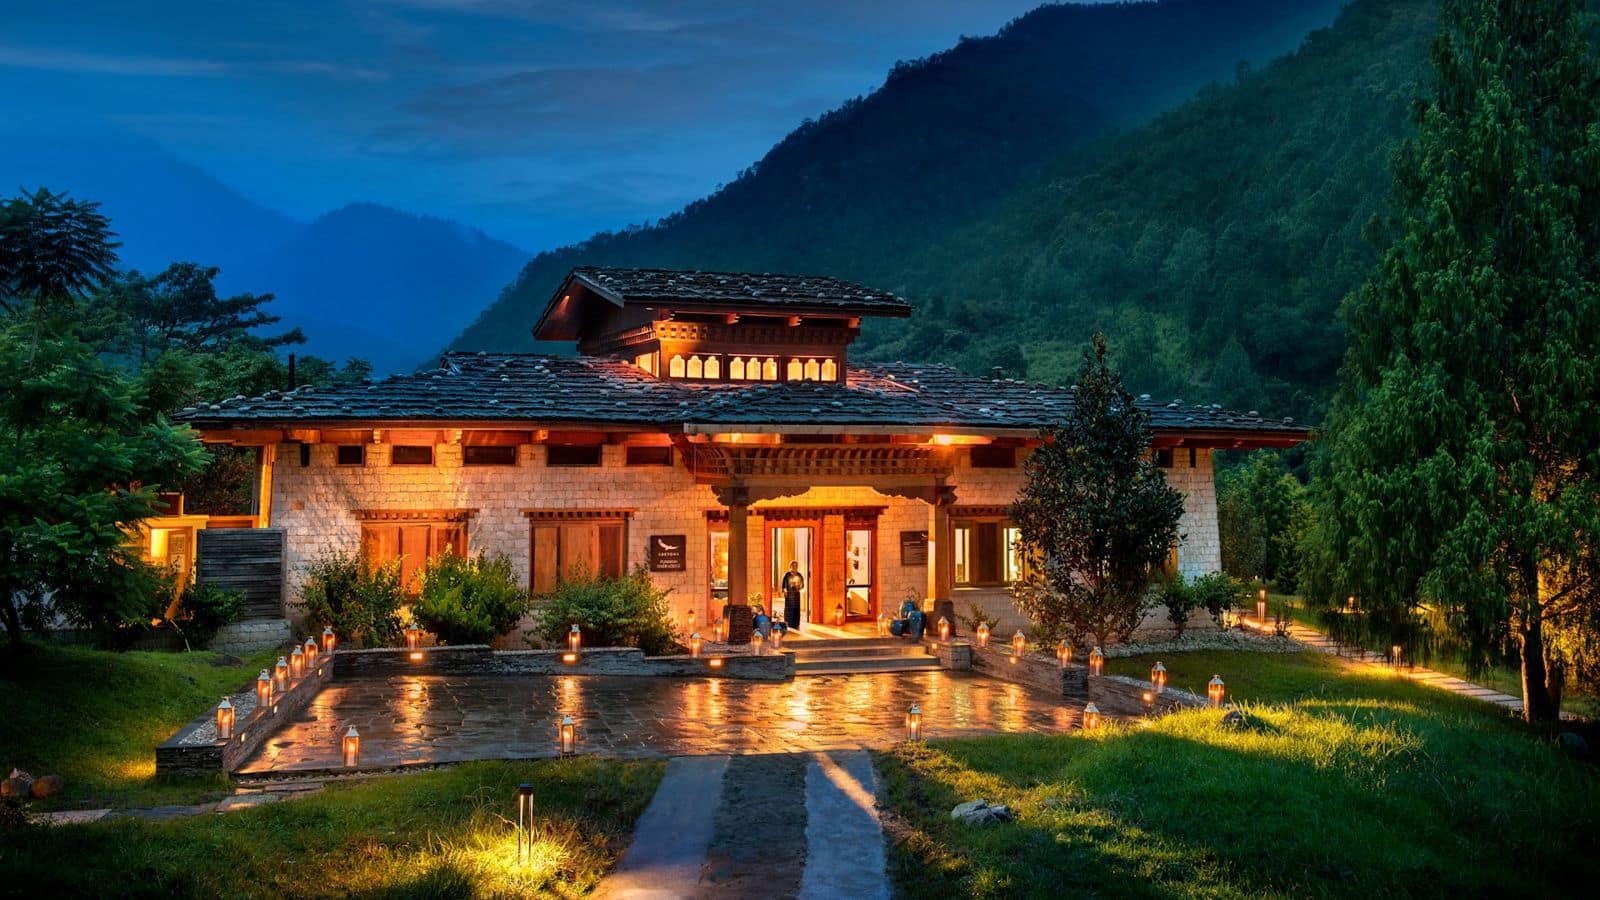 Traveling solo to Bhutan? Experience solitude with these recommendations